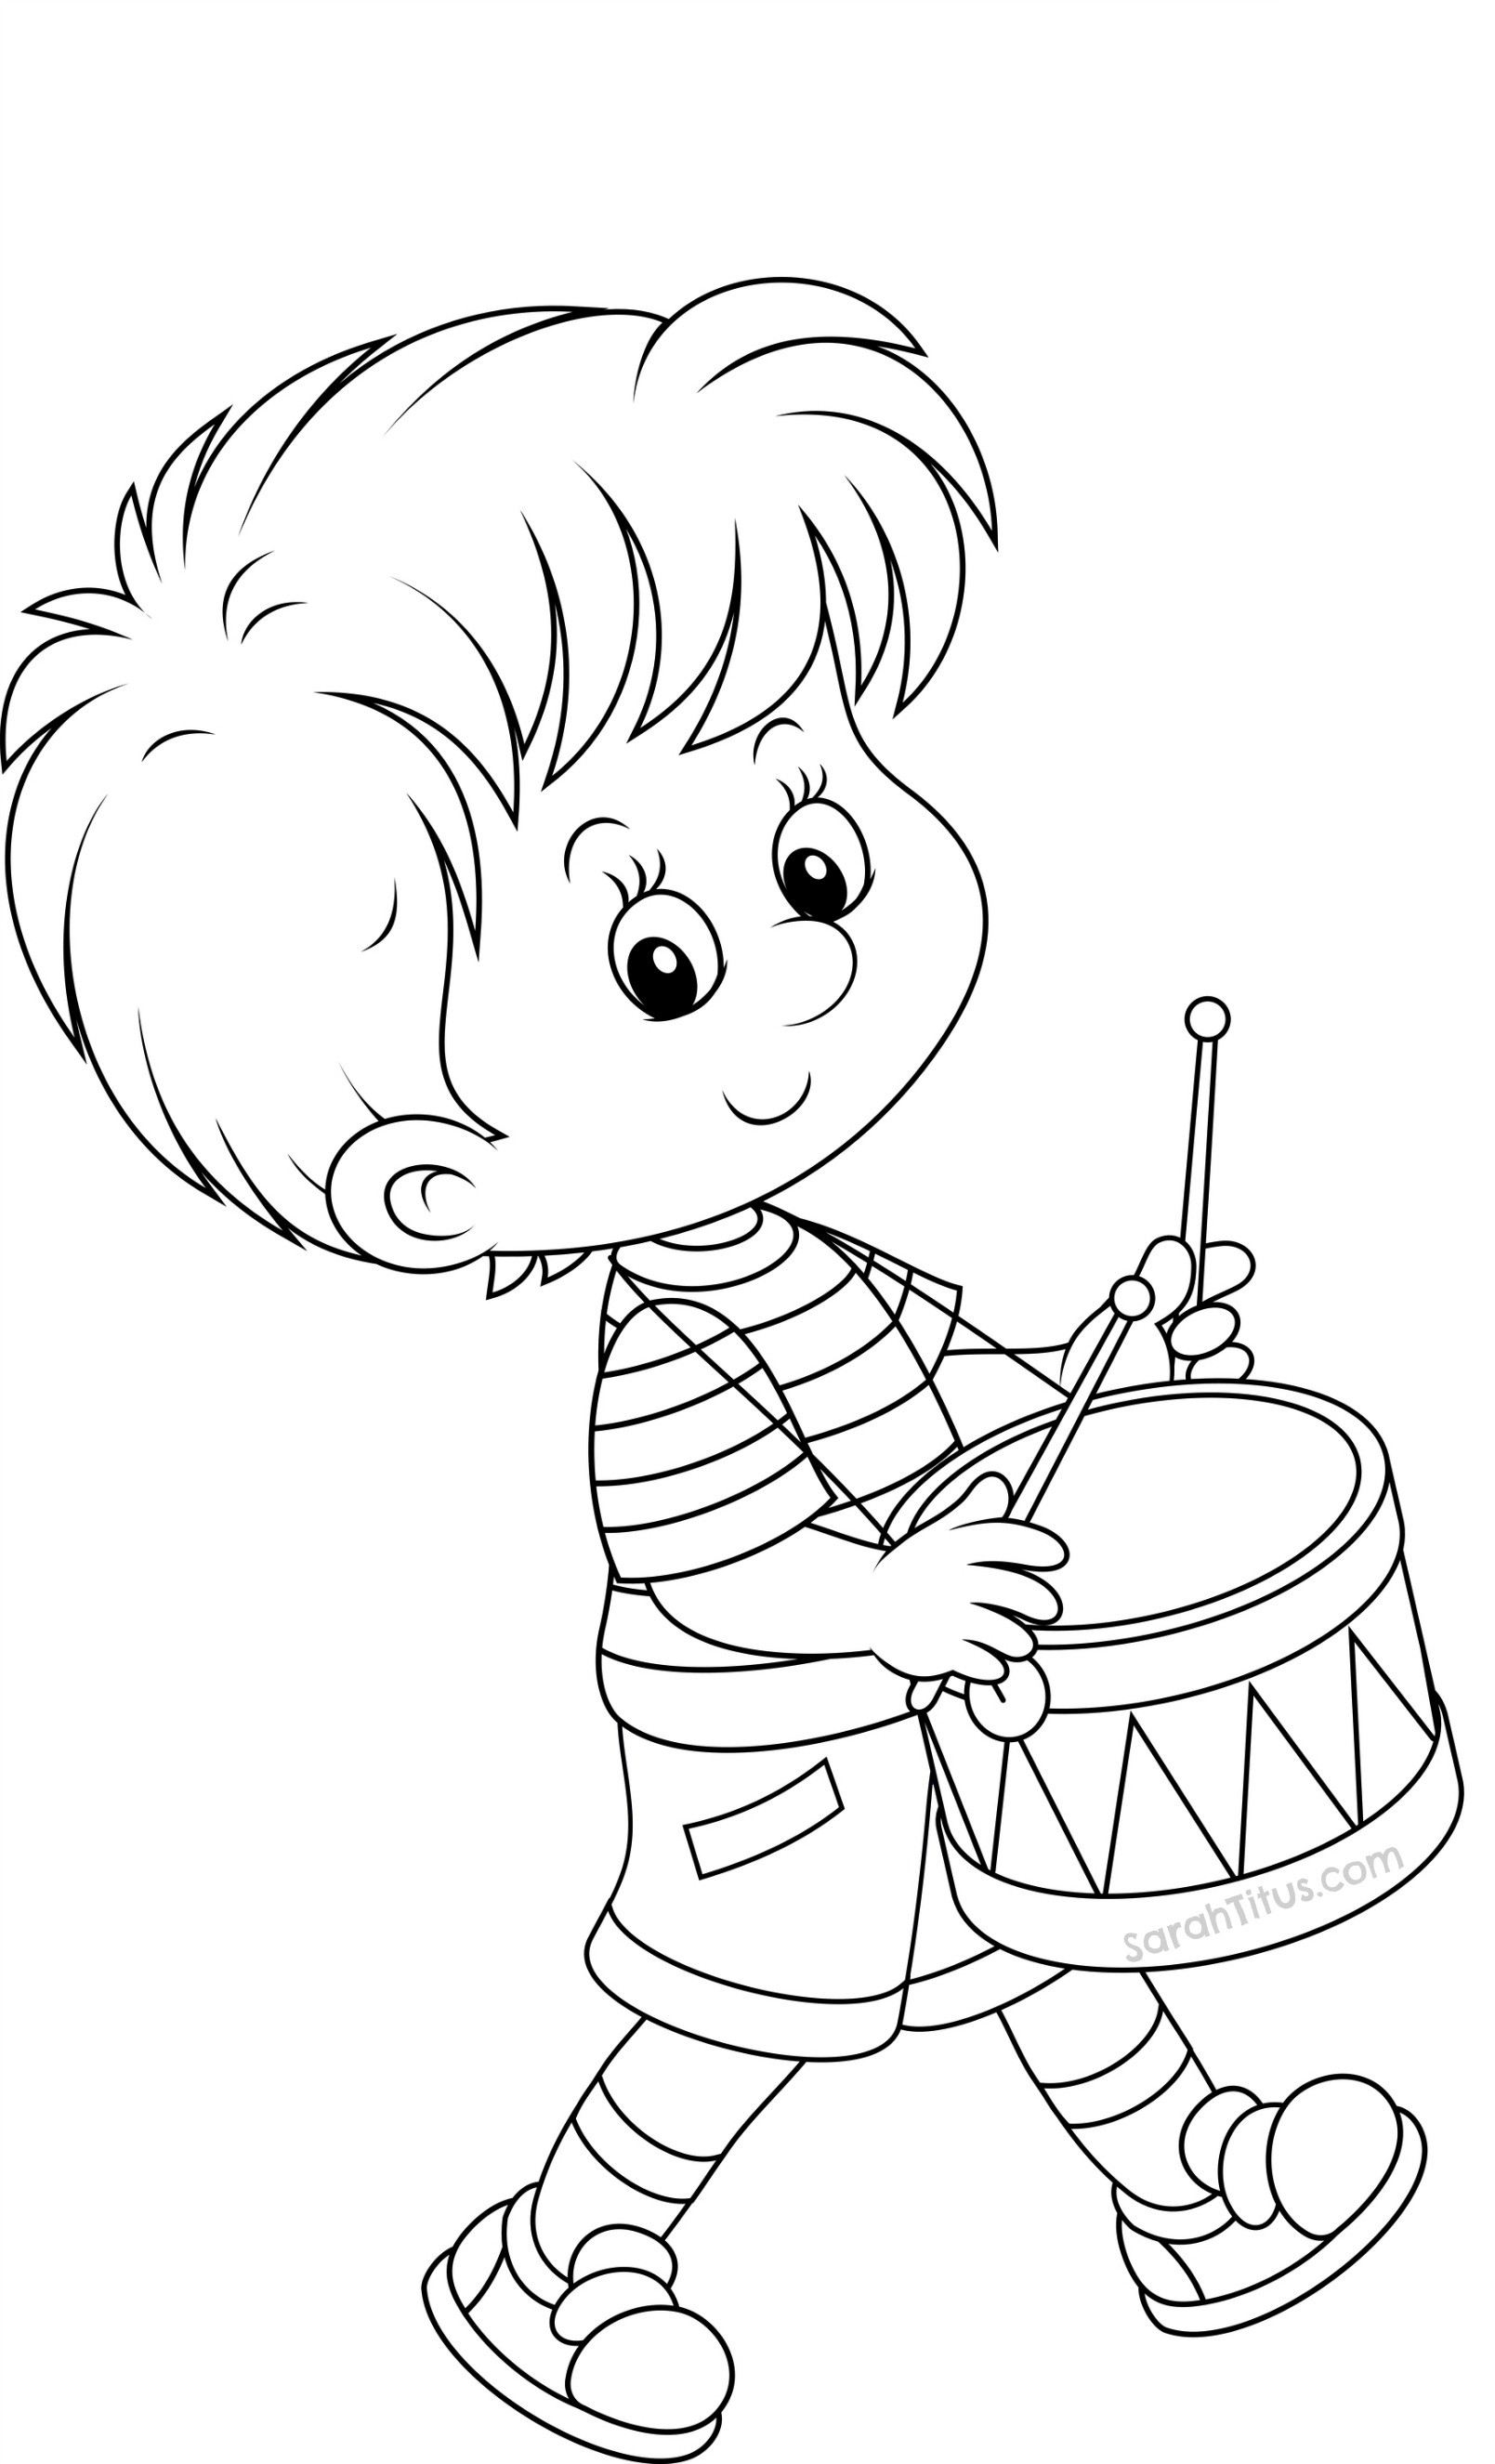 little-boy-blue-coloring-pages-at-getcolorings-free-printable-colorings-pages-to-print-and